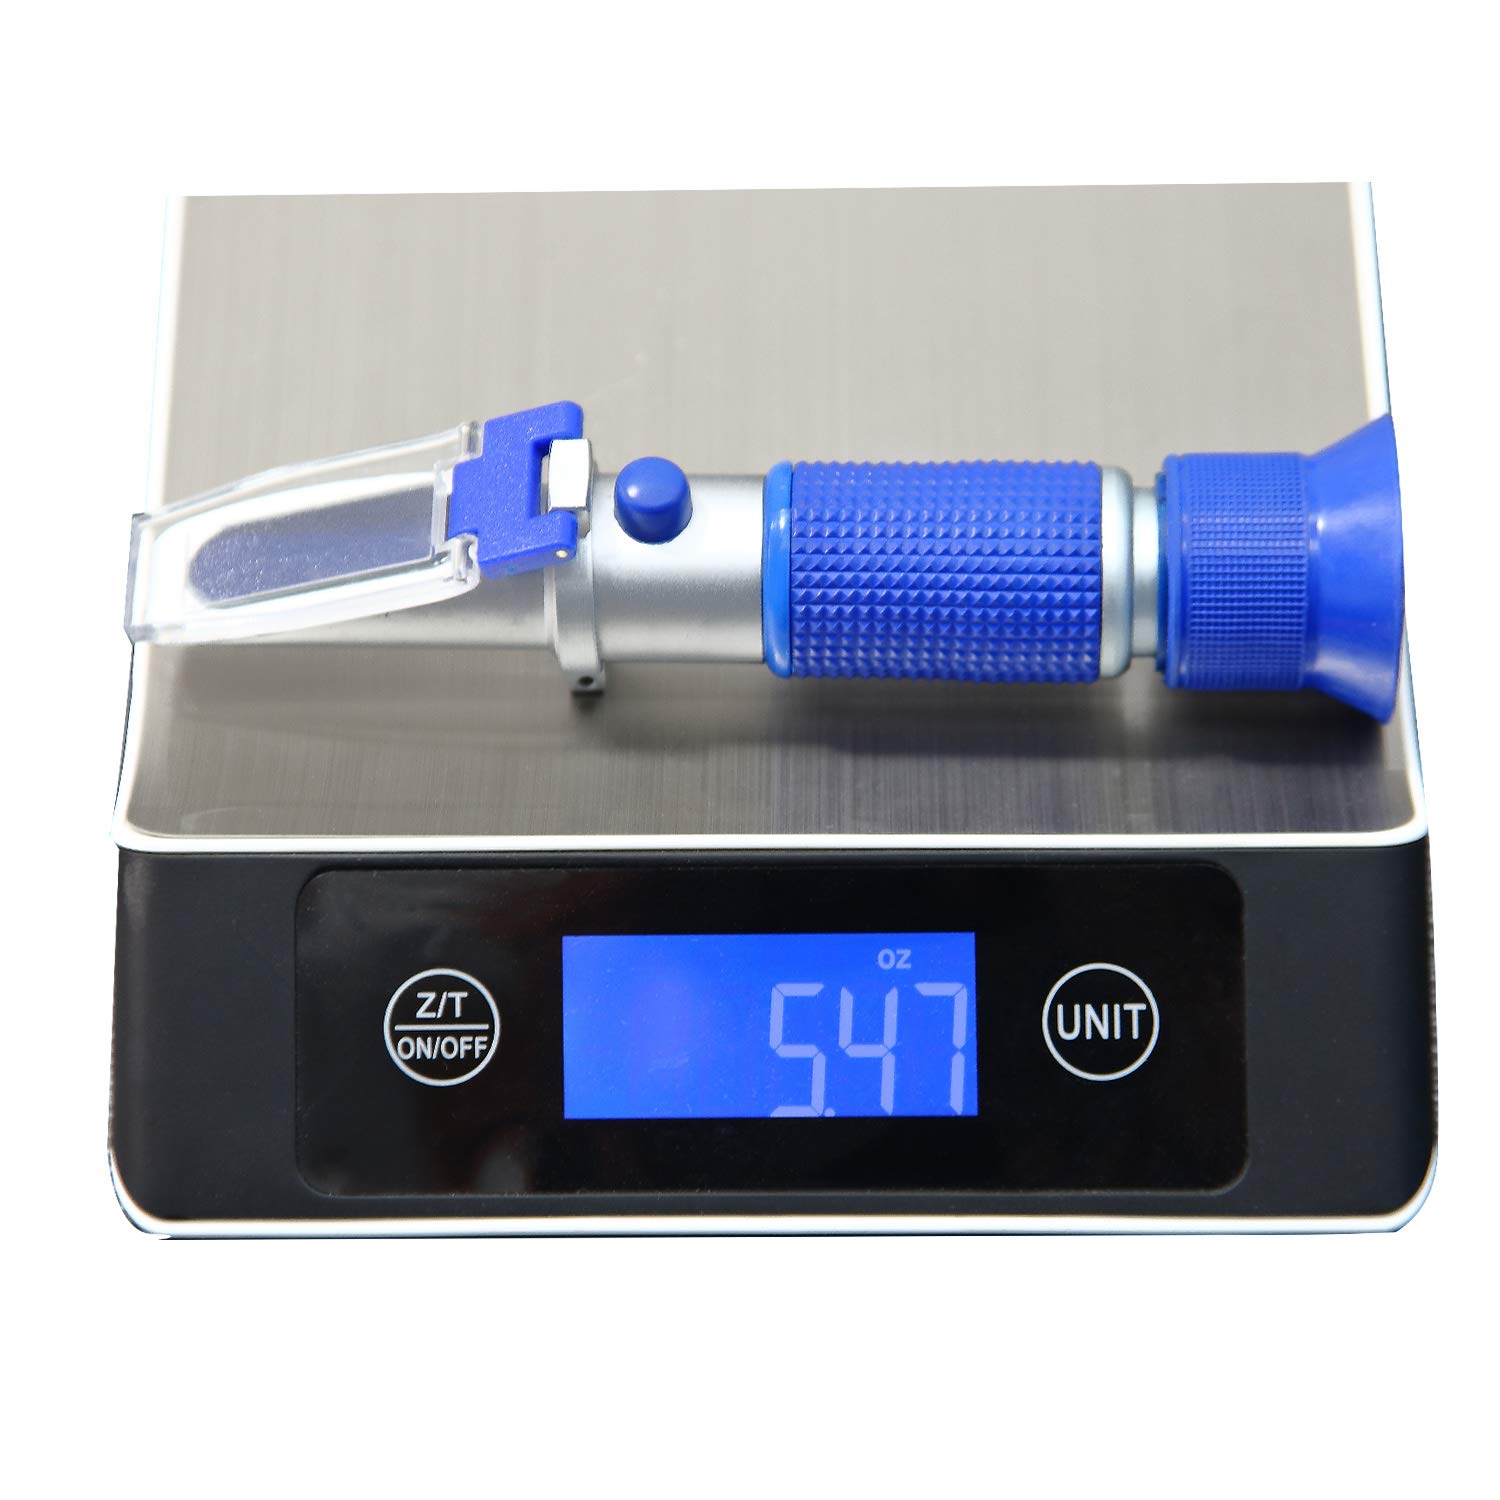 Generic AMTAST Hand Held DEF AdBlue Refractometer Tester for Urea Concentration in Diesel Exhaust Fluid Aqueous Urea Solution with ATC